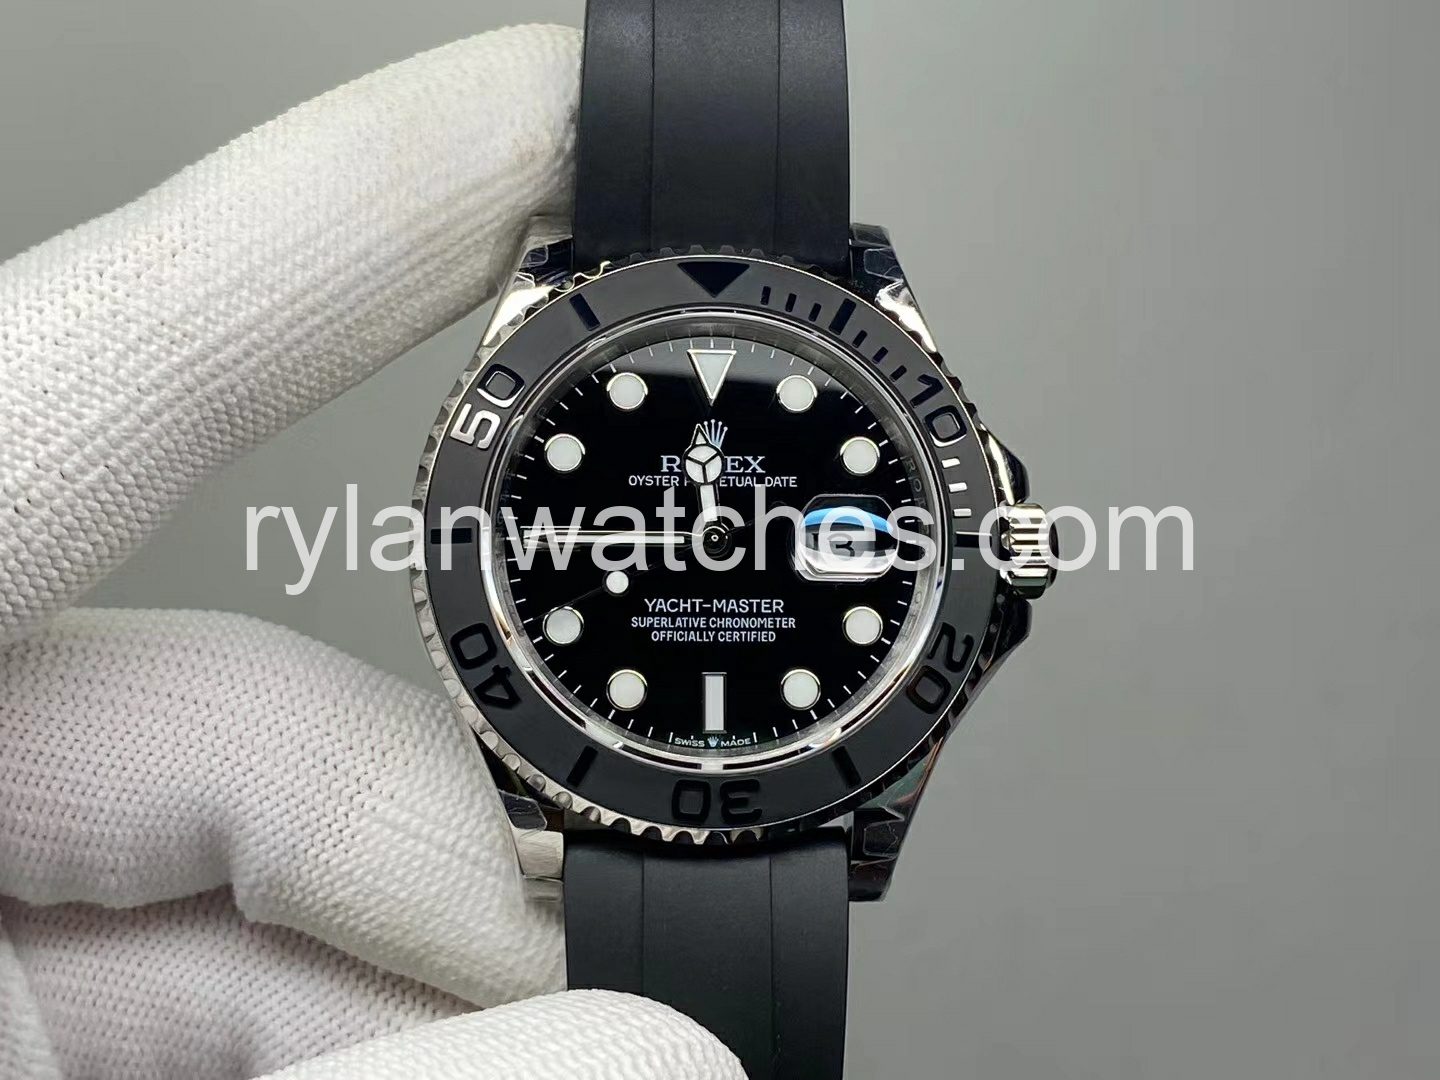 Evaluating The Quality Of Replica Rolex Watches